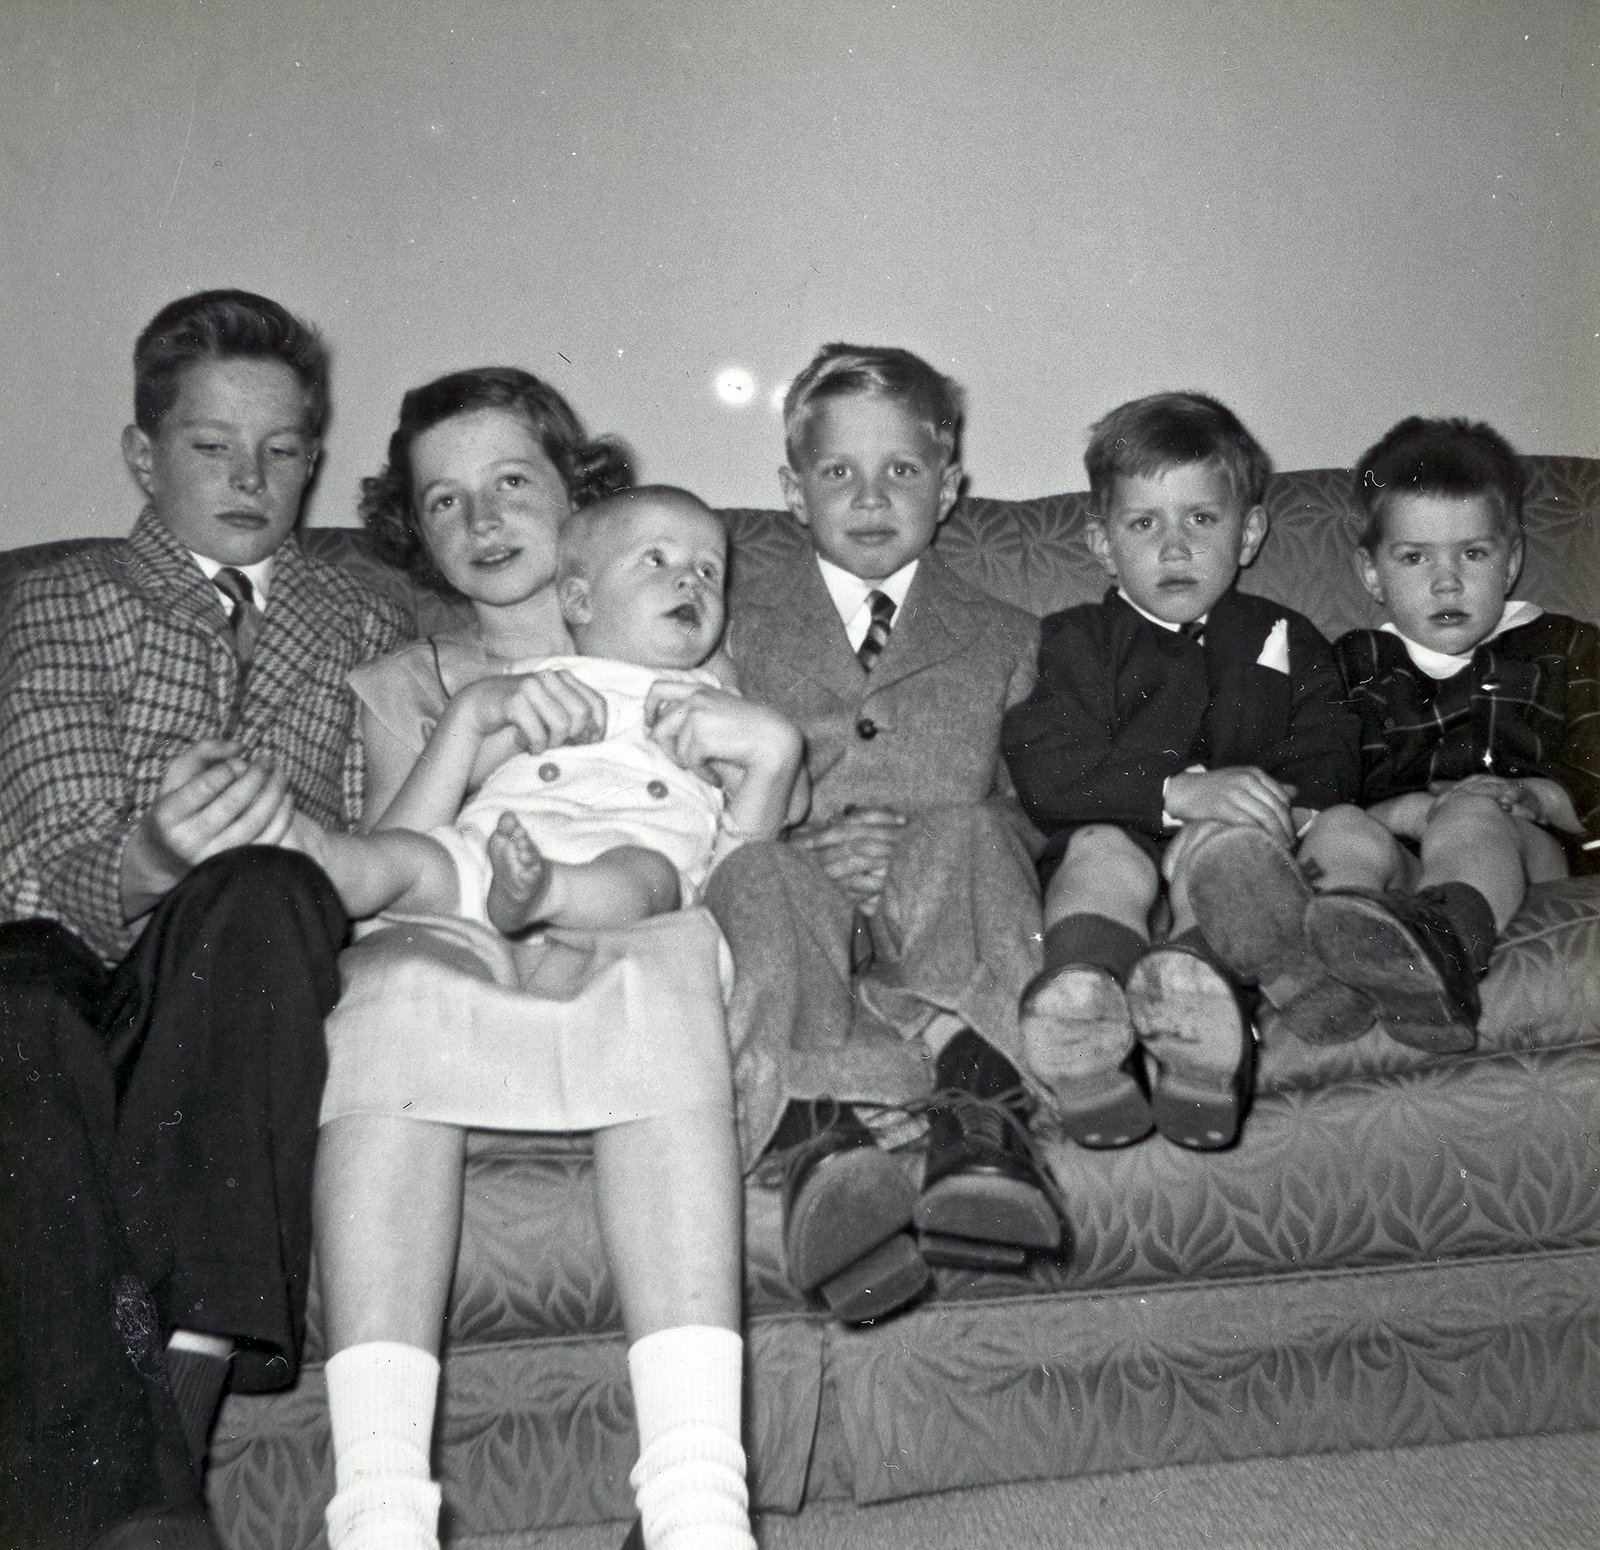 The family has just moved from an apartment in the Bronx to a house in Riverdale, New York City. Seen here are (left to right) Thomas, Rita, baby Vincent, Matthew, Peter, and Chris, 1952.